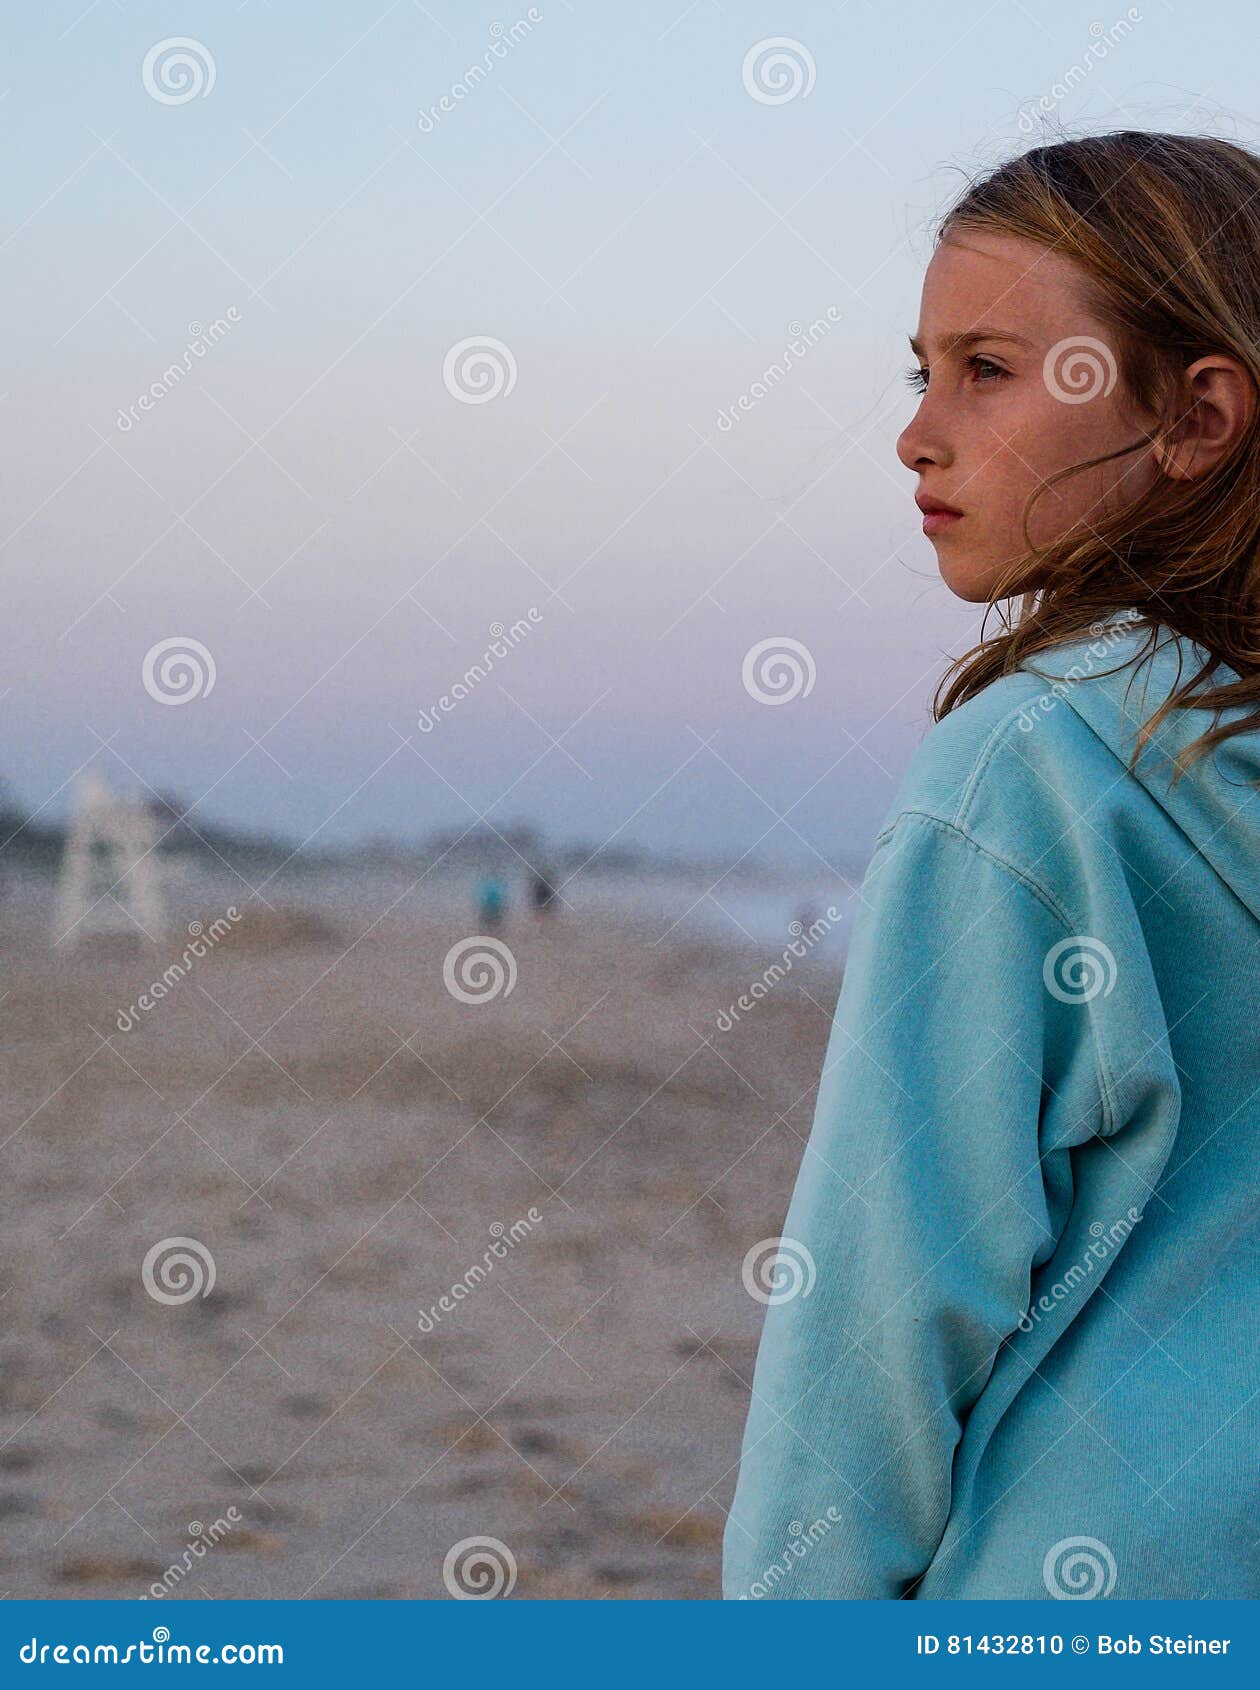 young girl on empty beach